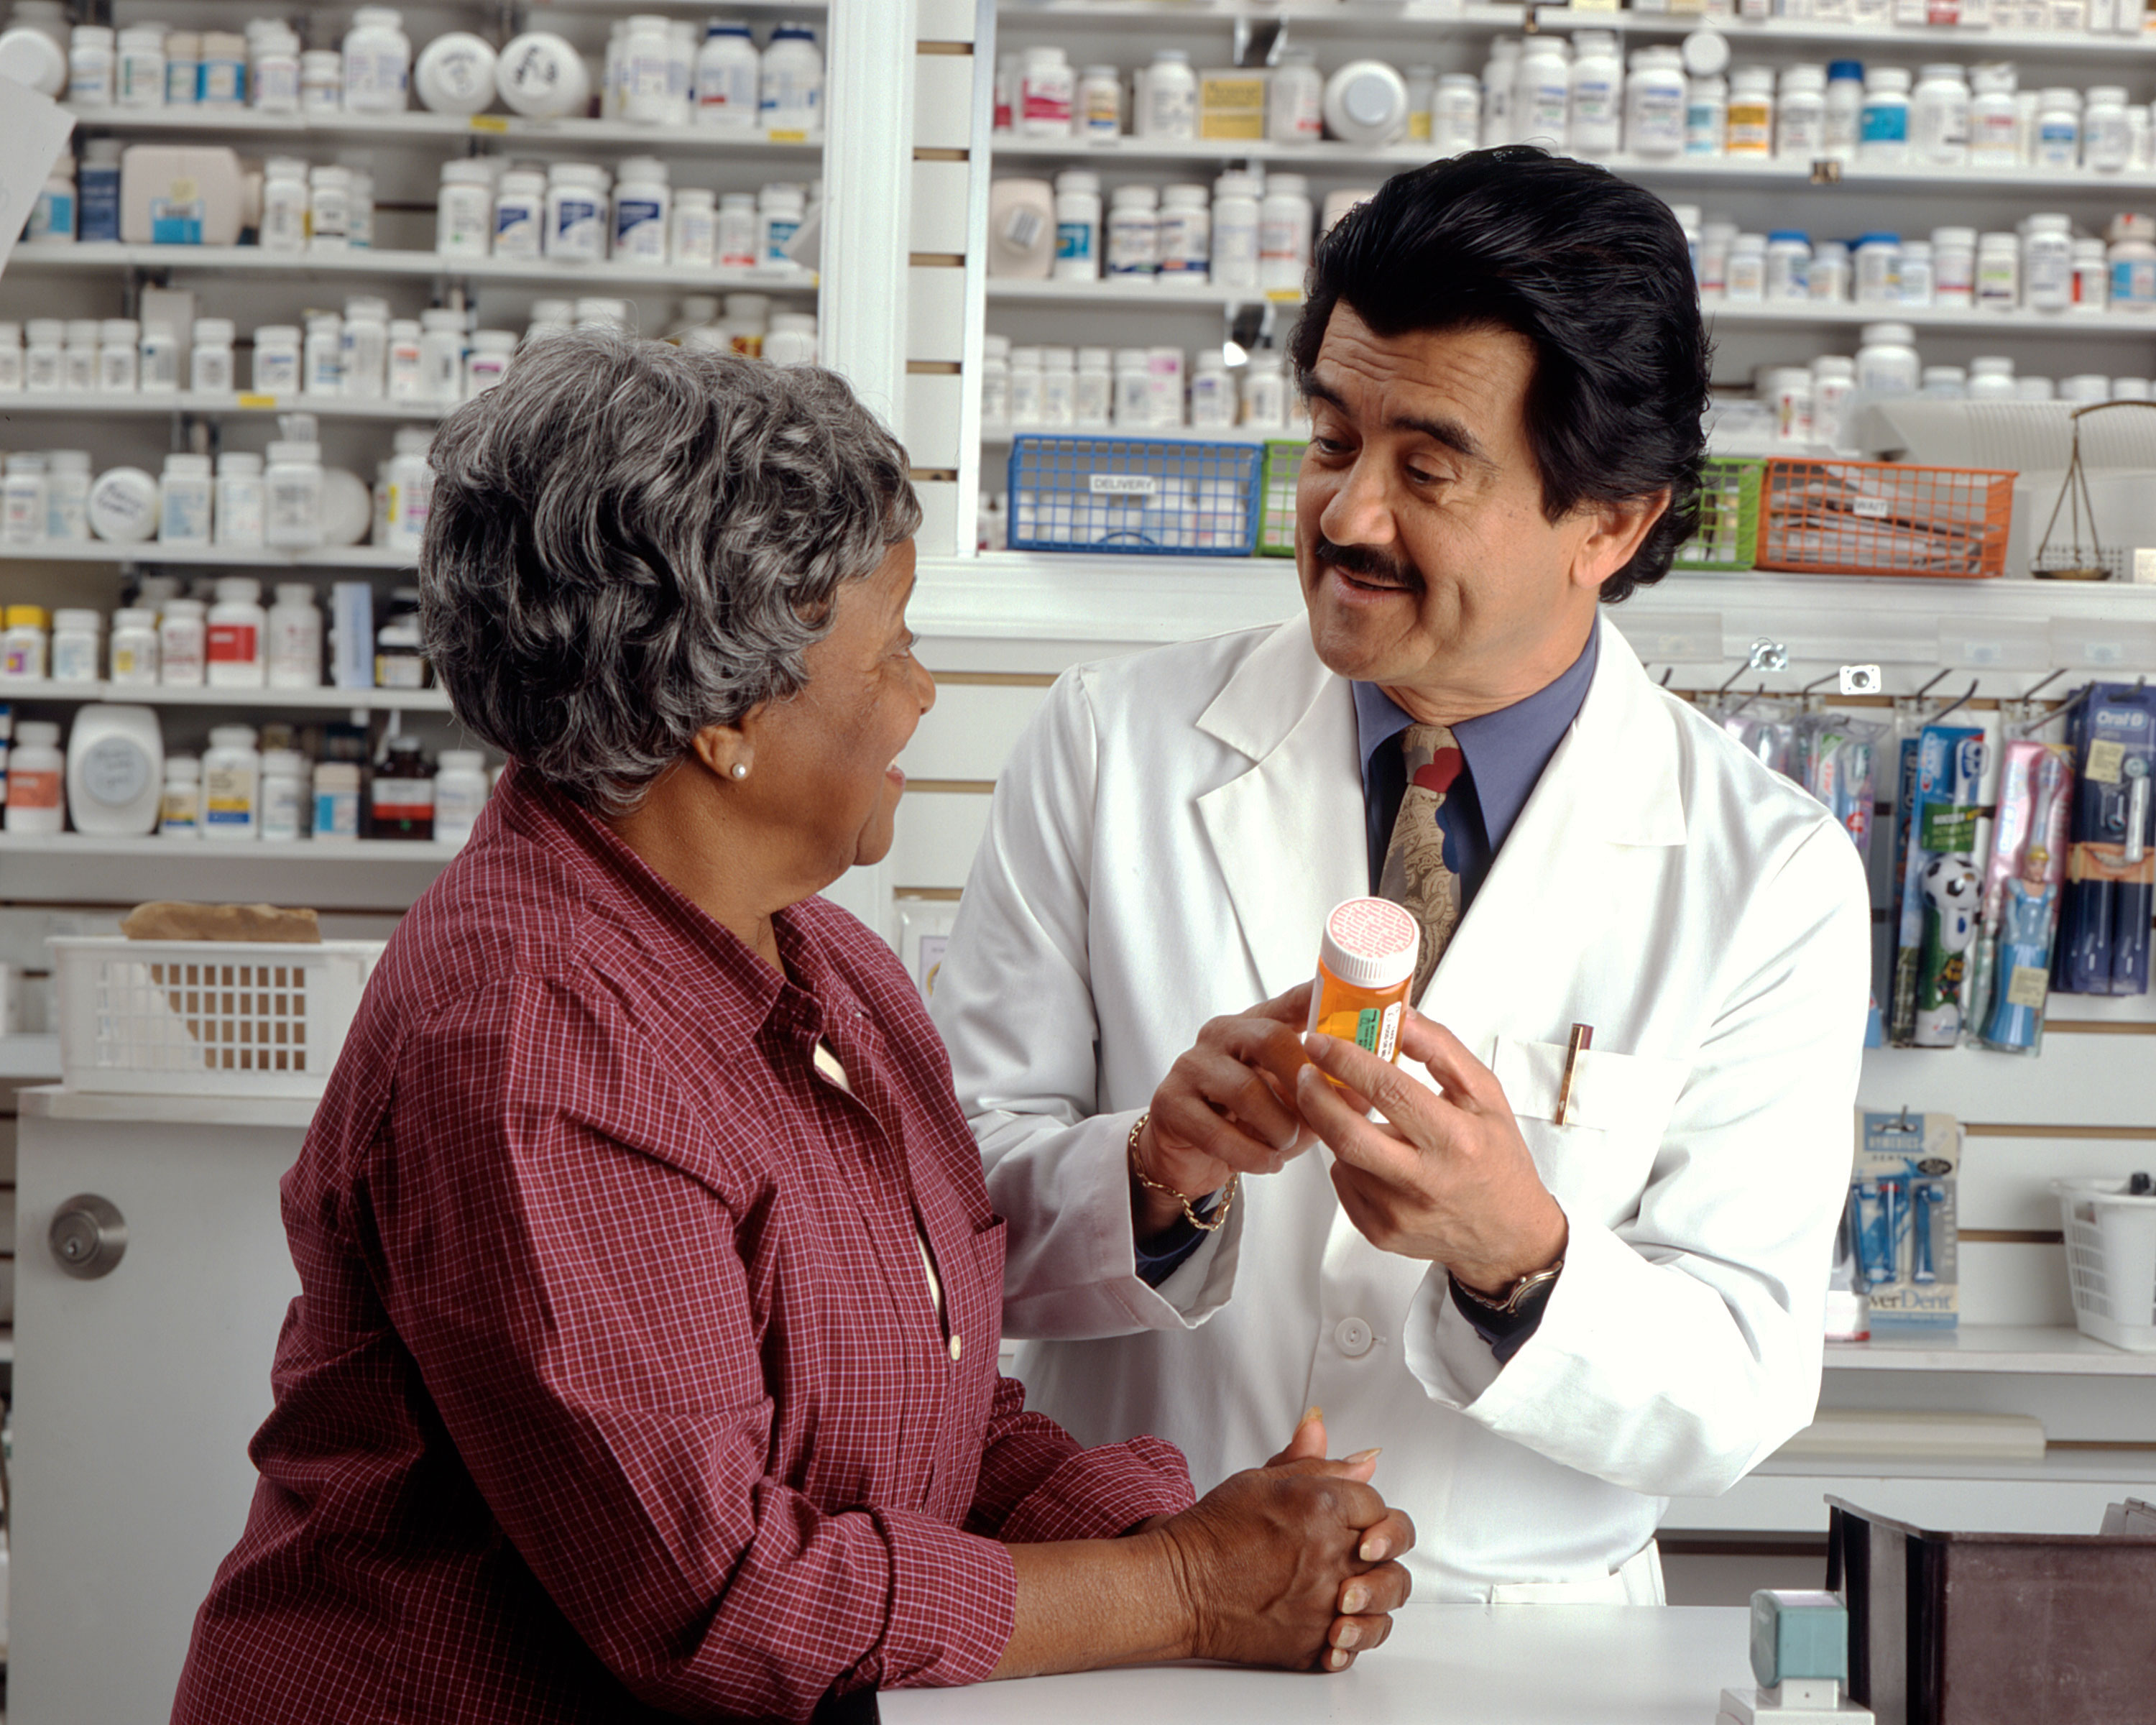 File:Woman consults with pharmacist.jpg - Wikimedia Commons